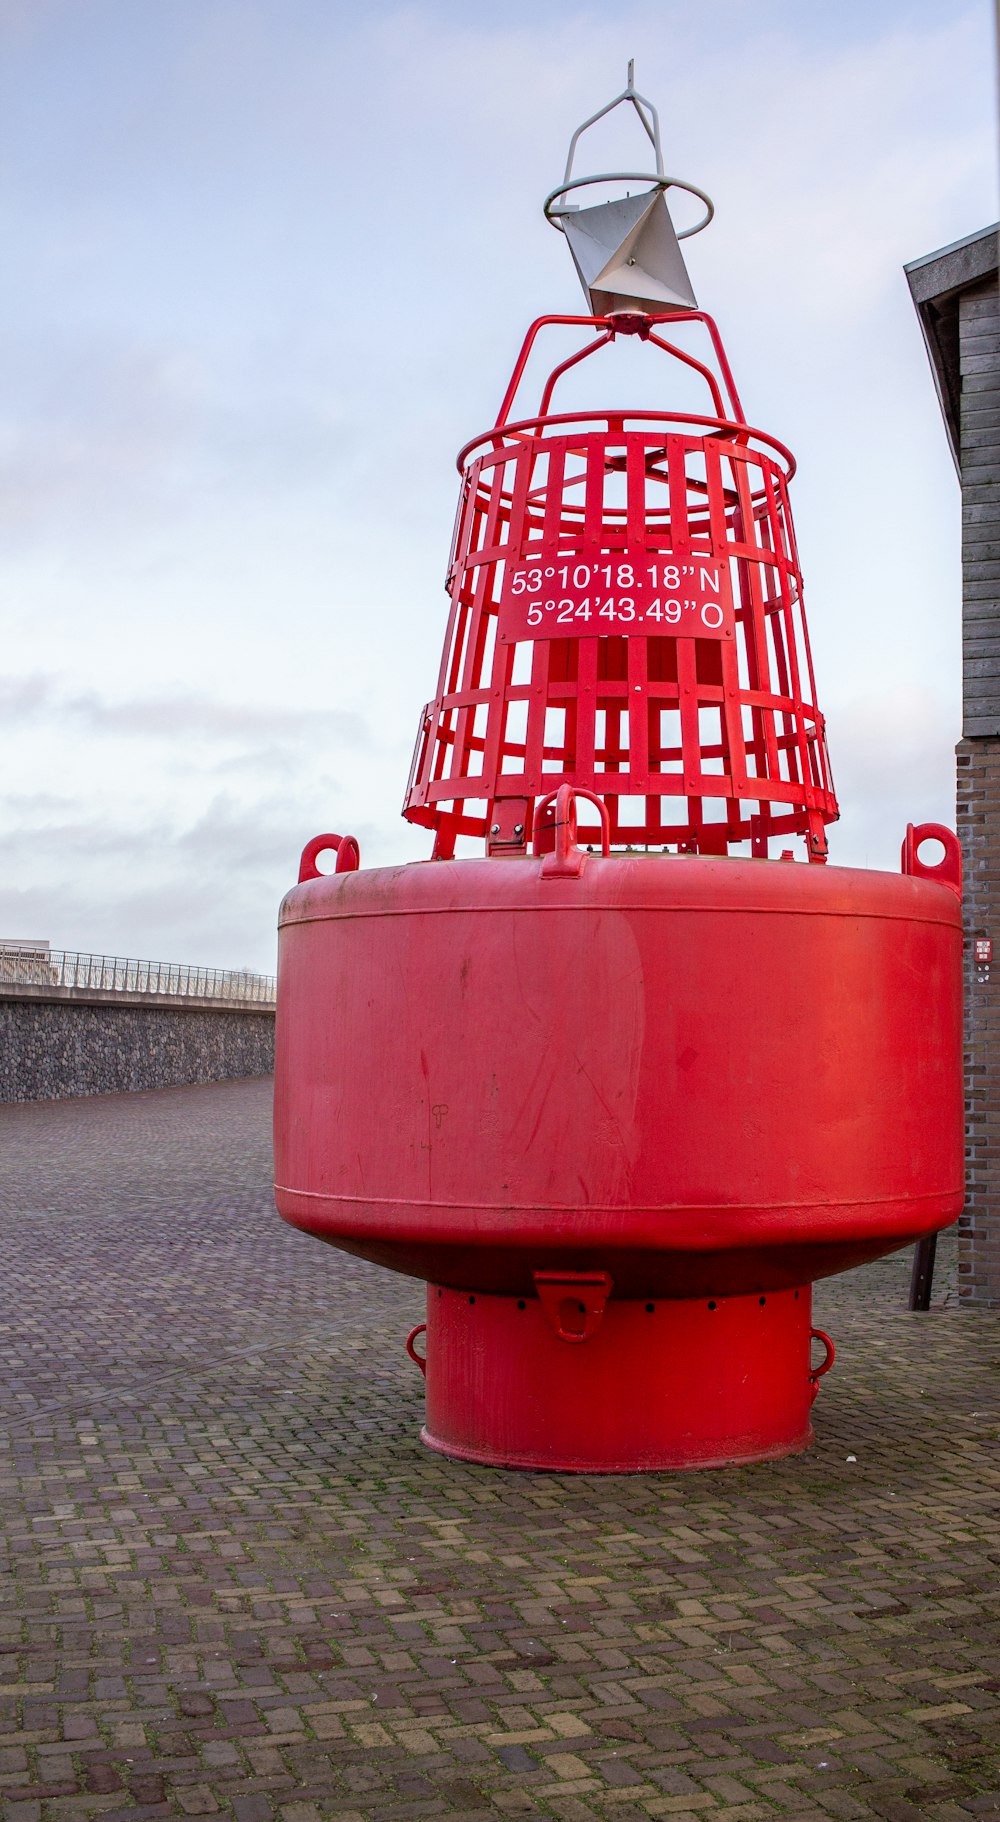 a large red object on a brick walkway